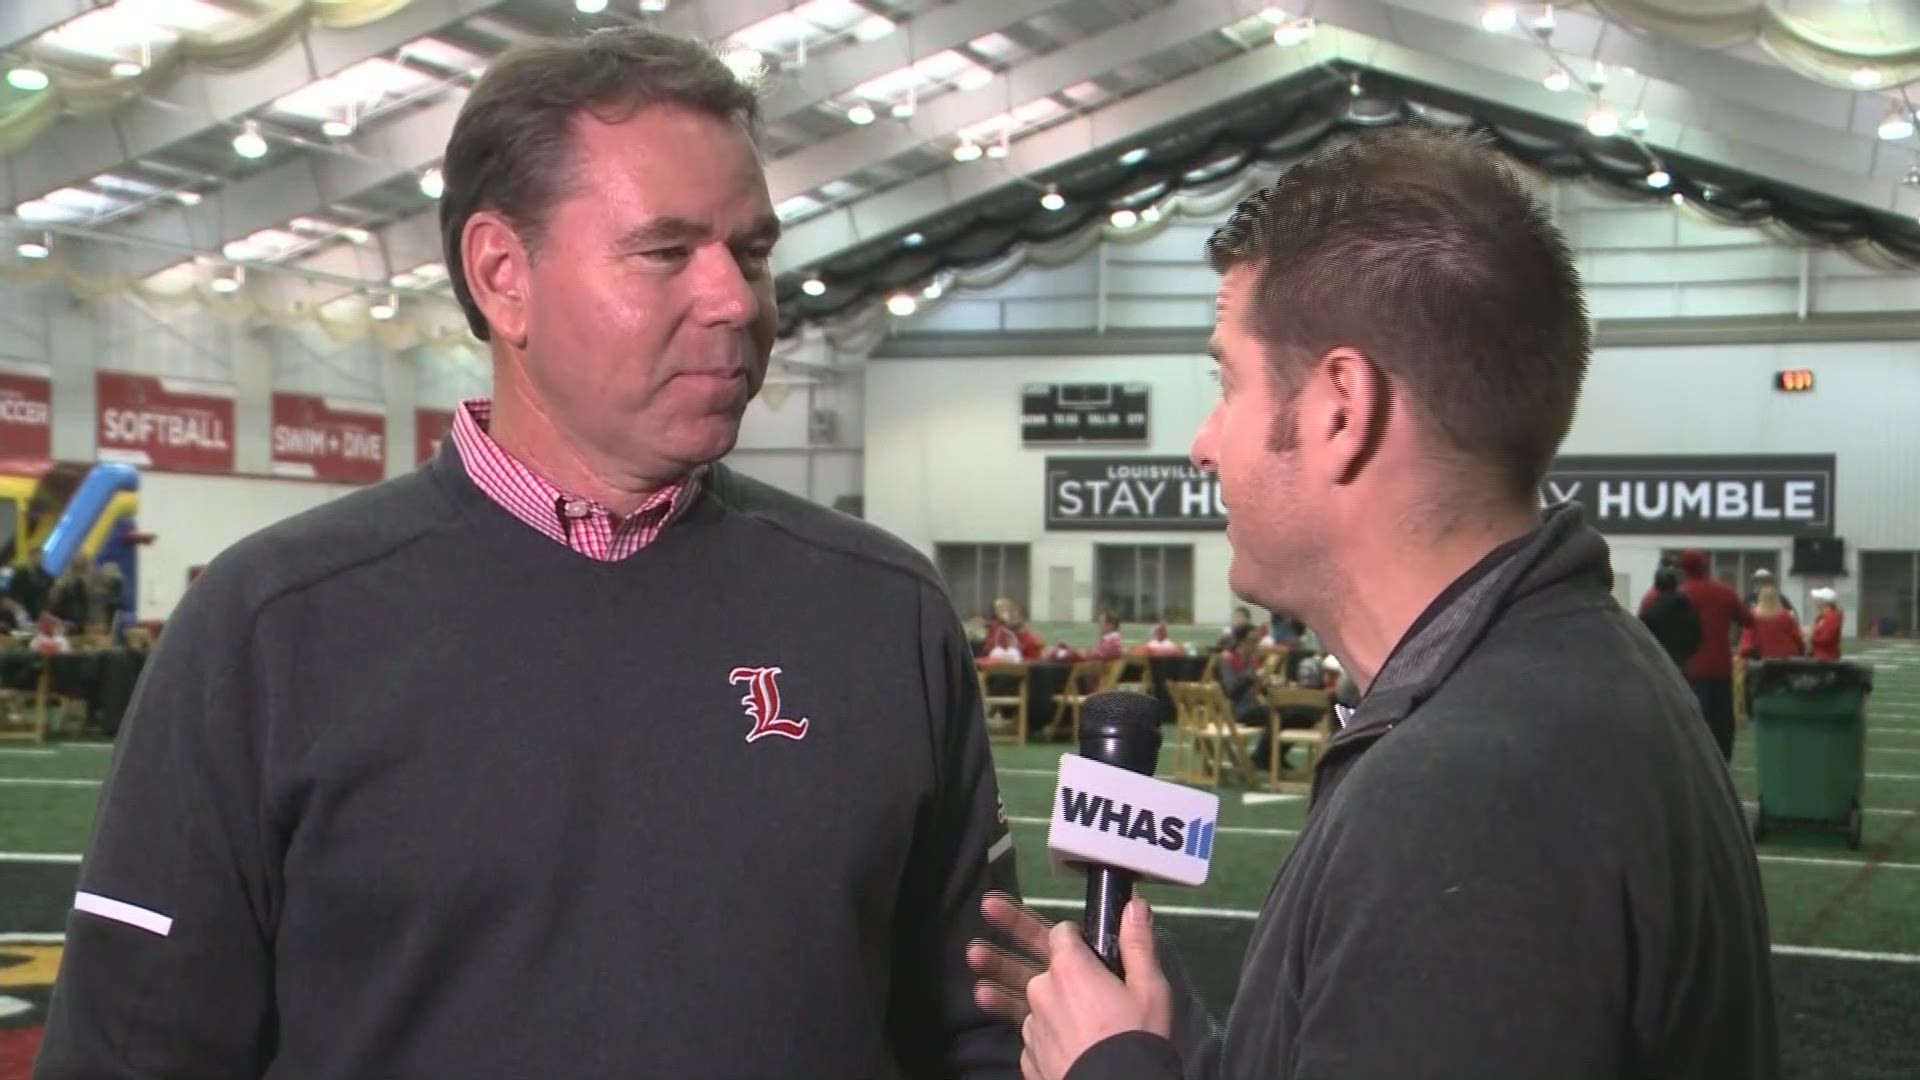 WHAS11 Sports Director Kent Spencer caught up with UofL's Vince Tyra and talked about the search to replace Bobby Petrino